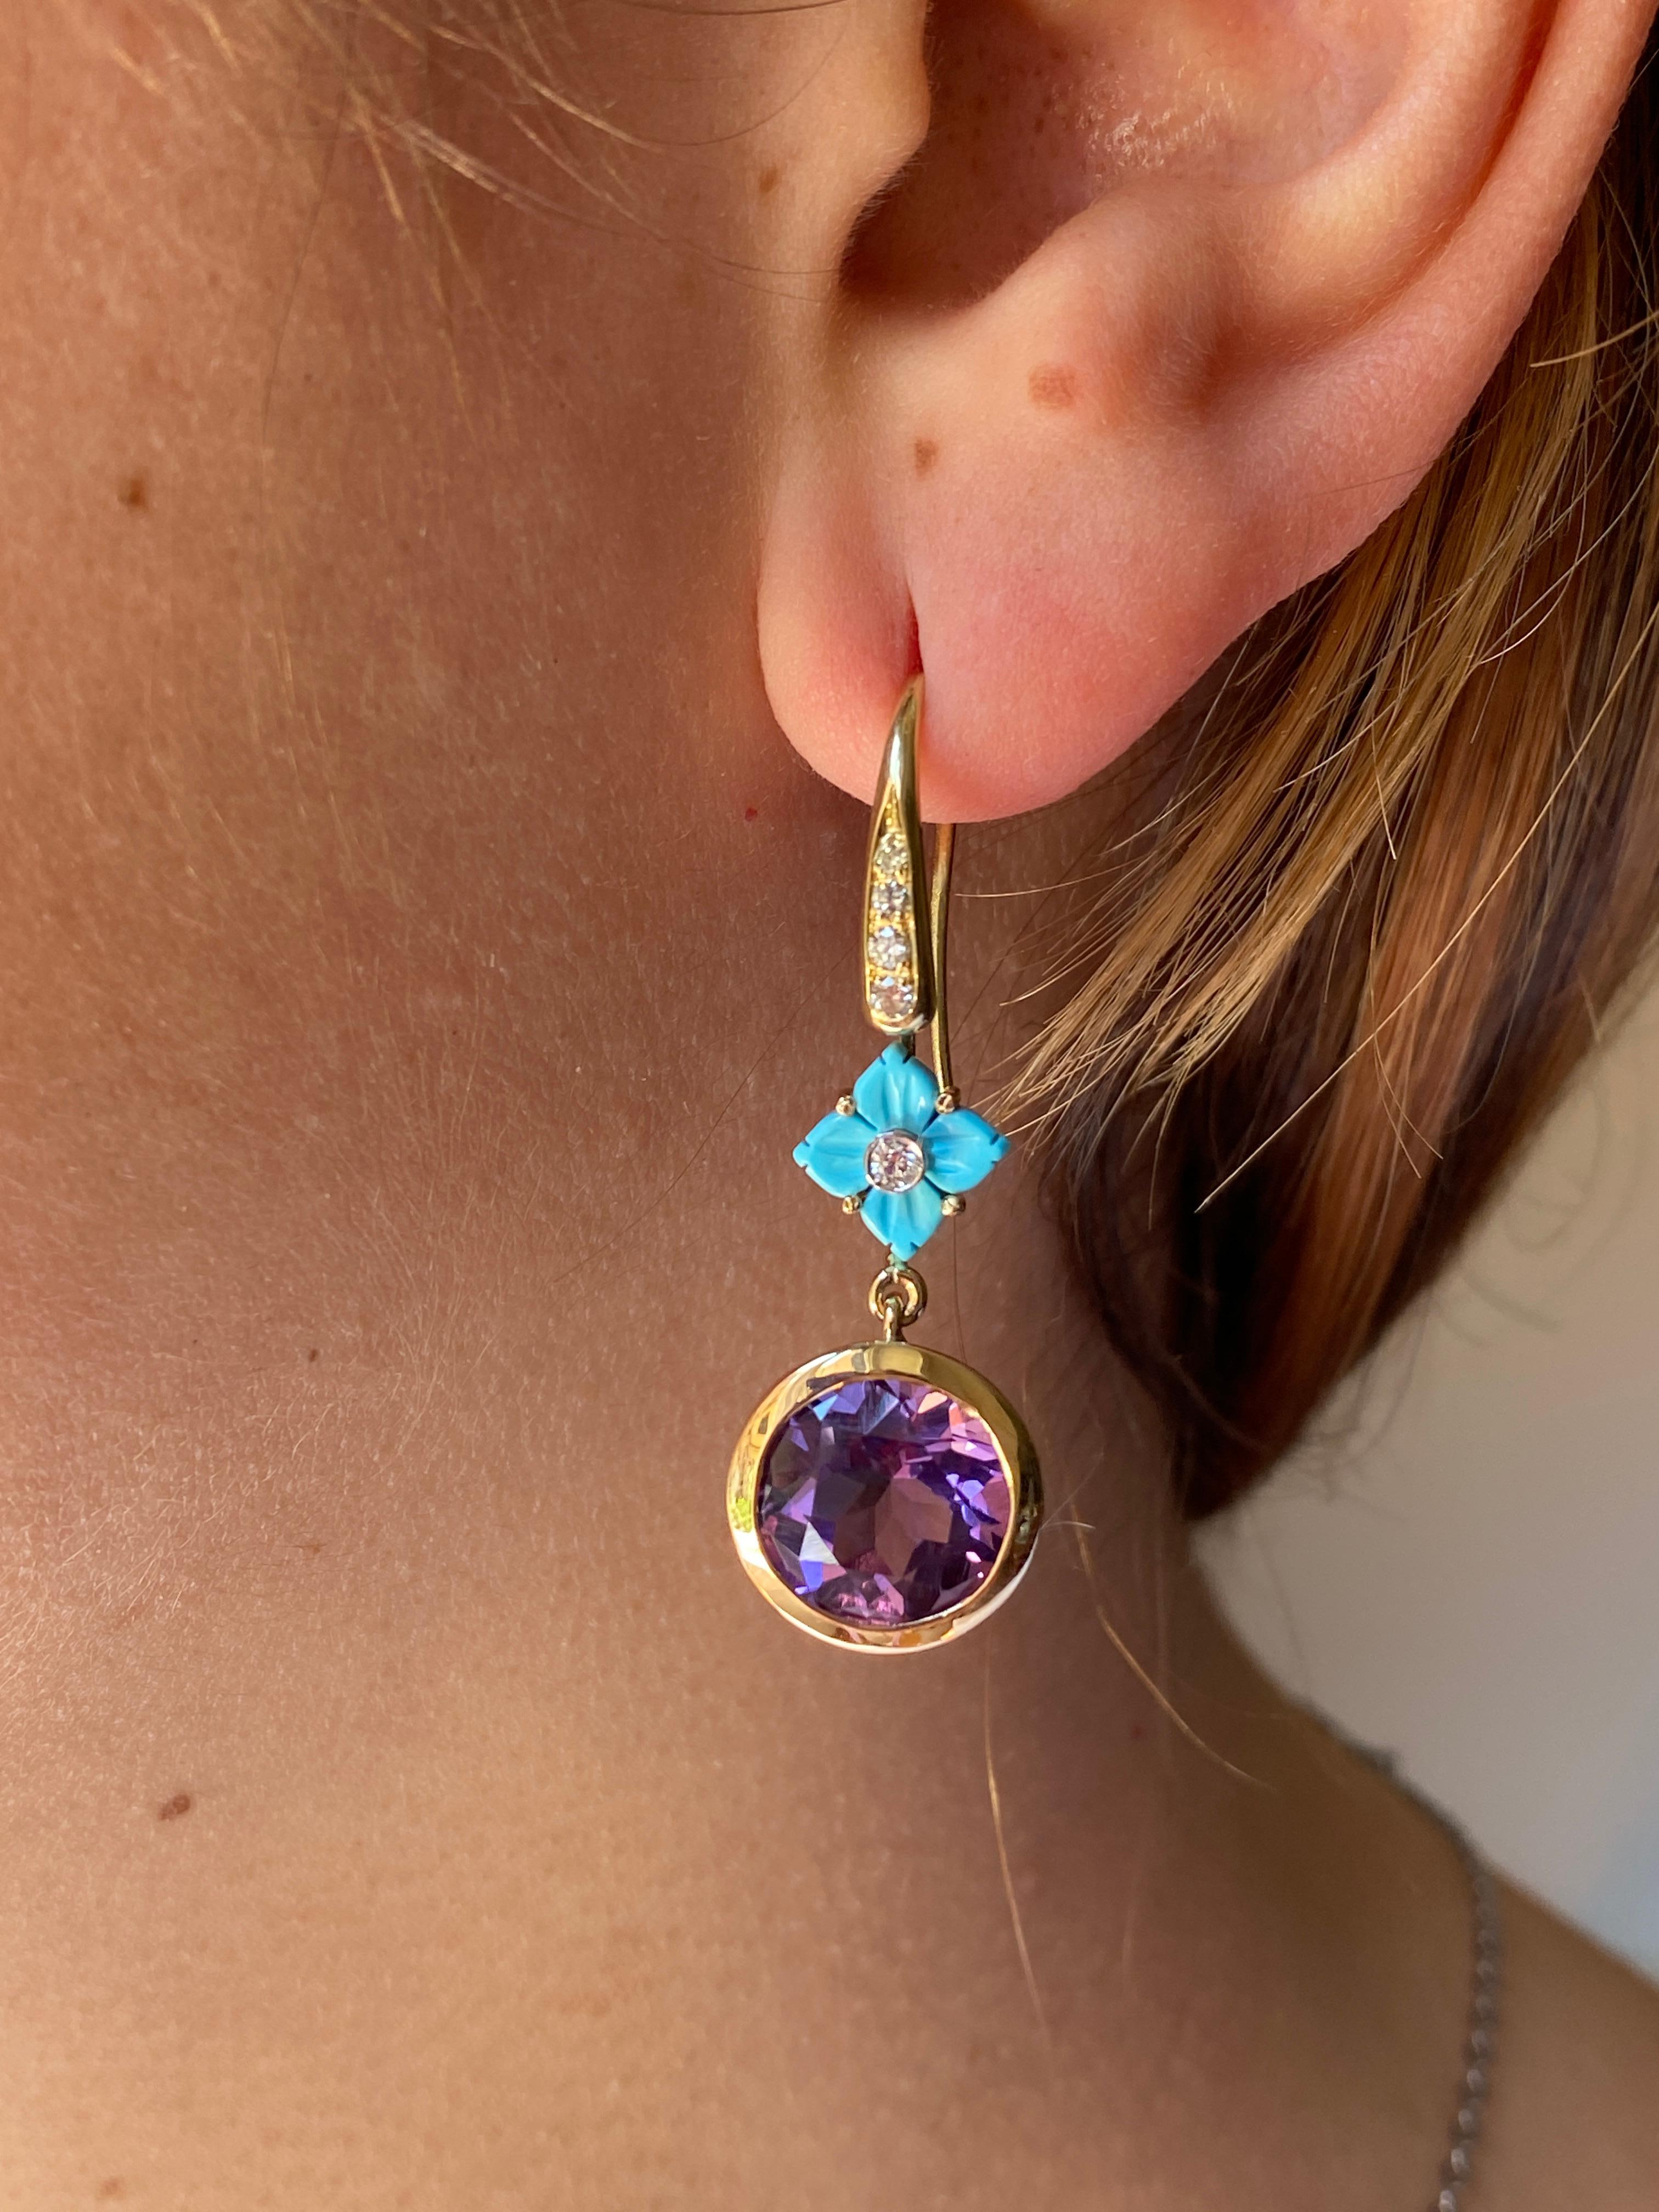 Introducing the Rossella Ugolini 18K Yellow Gold Handcrafted Earrings, a captivating masterpiece meticulously crafted in Italy. These one-of-a-kind earrings feature a mesmerizing little turquoise flower design adorned with dazzling amethyst and